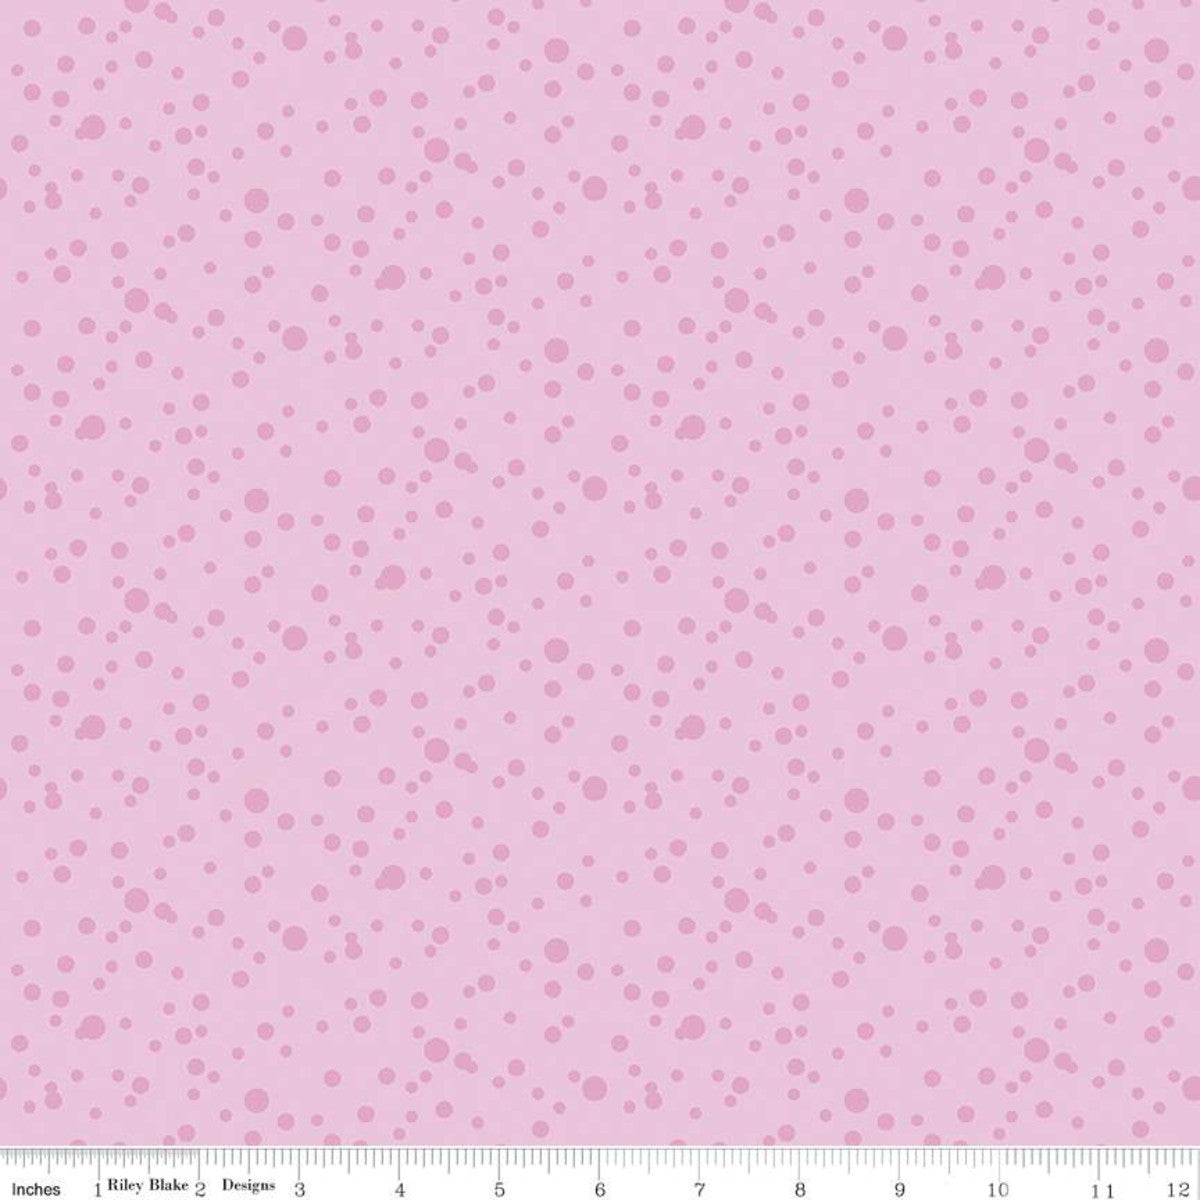 Gnomes In Love by Tara Reed Dots Pink     C11313-PINK Cotton Woven Fabric